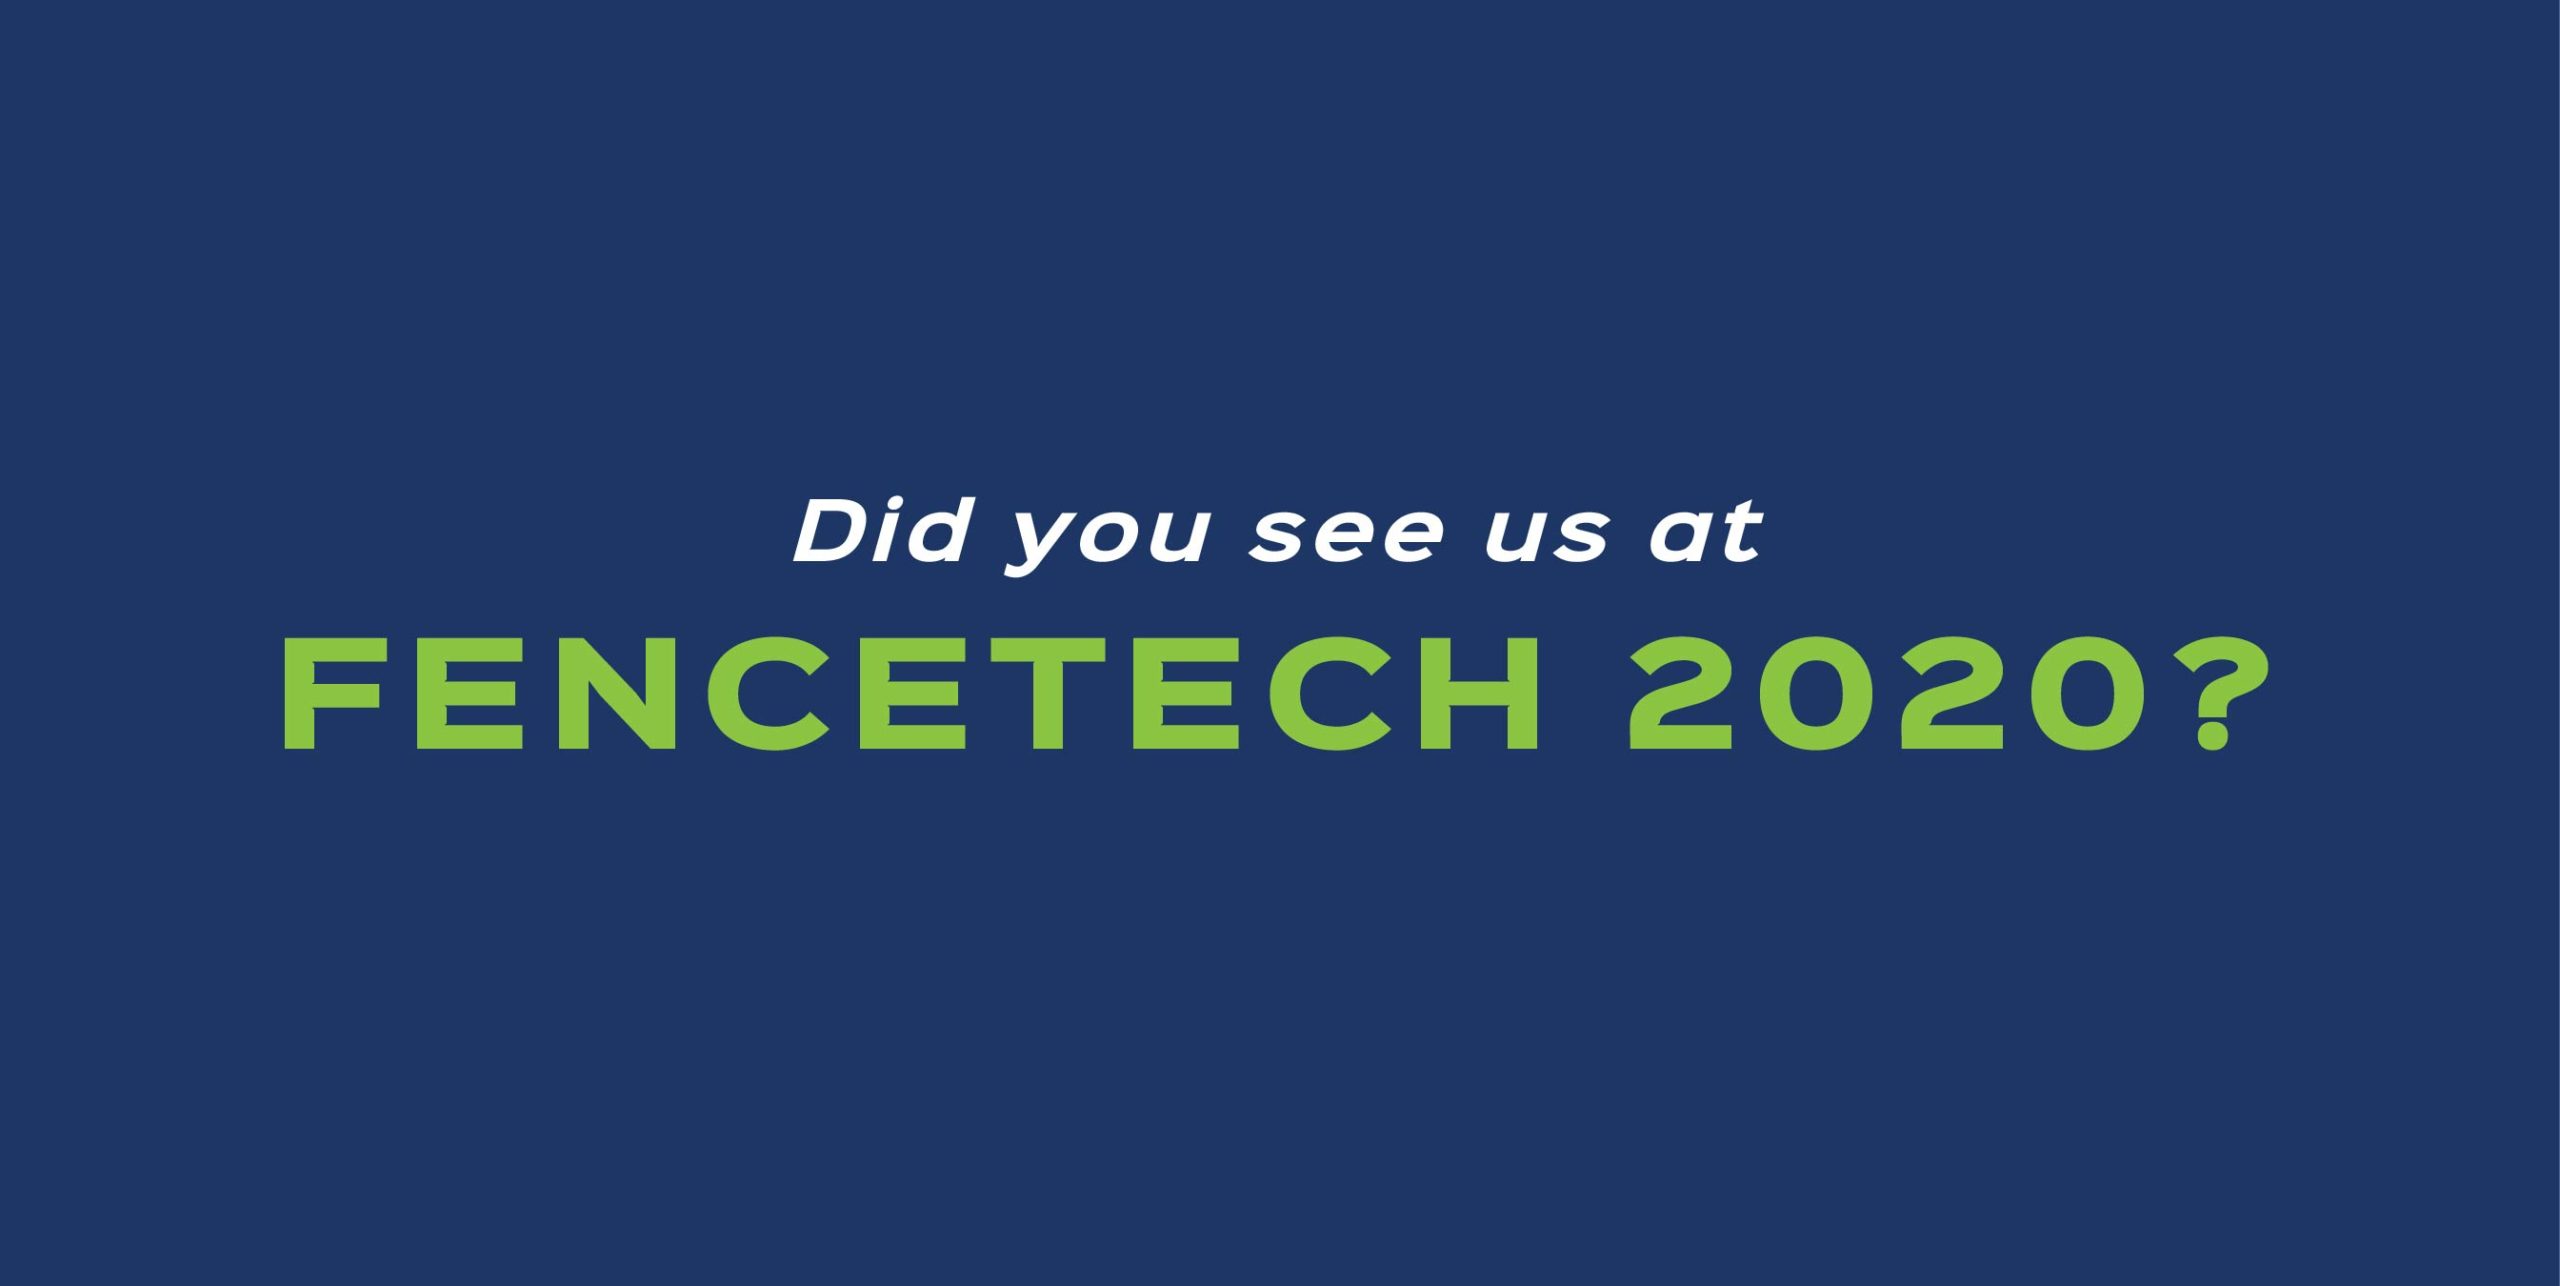 Did you see us at FENCETECH 2020?